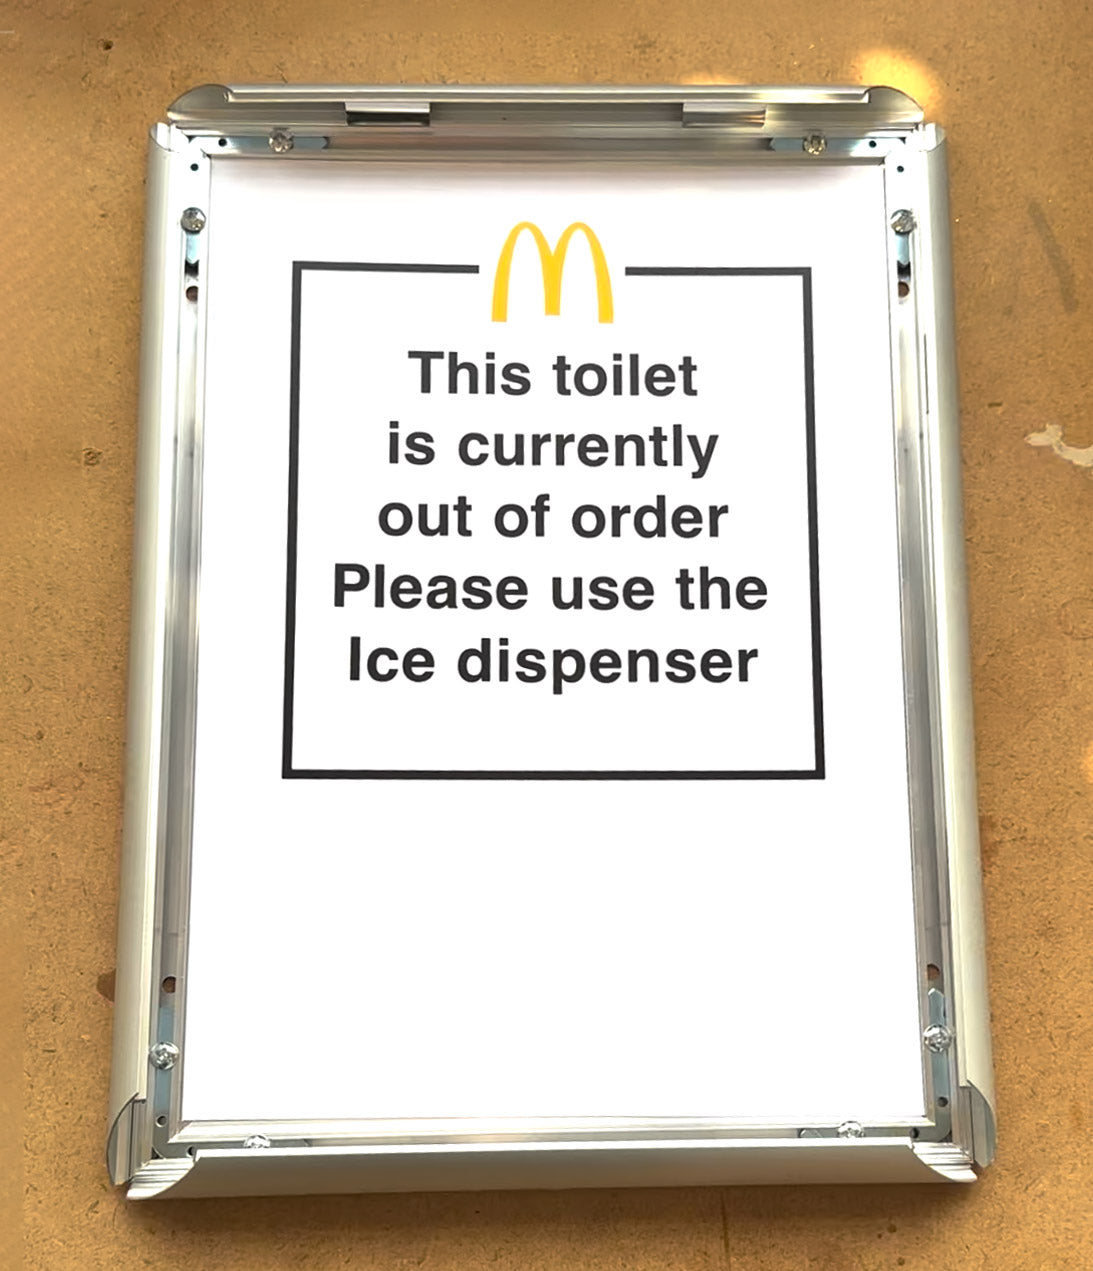 This toilet is currently out of order...